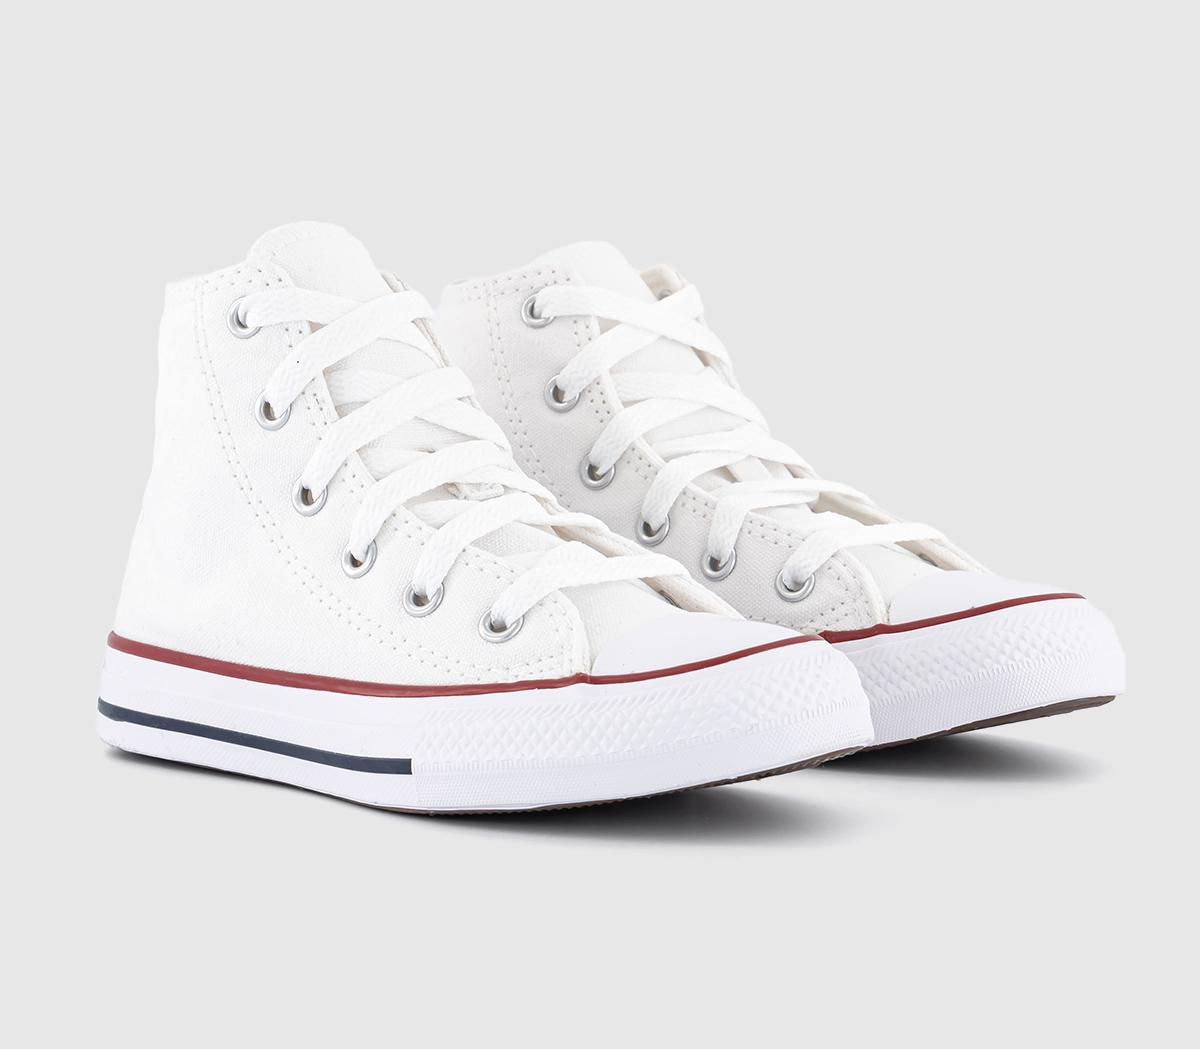 Converse Kids White All Star High Mid Sizes Optical Trainers, 1 Youth